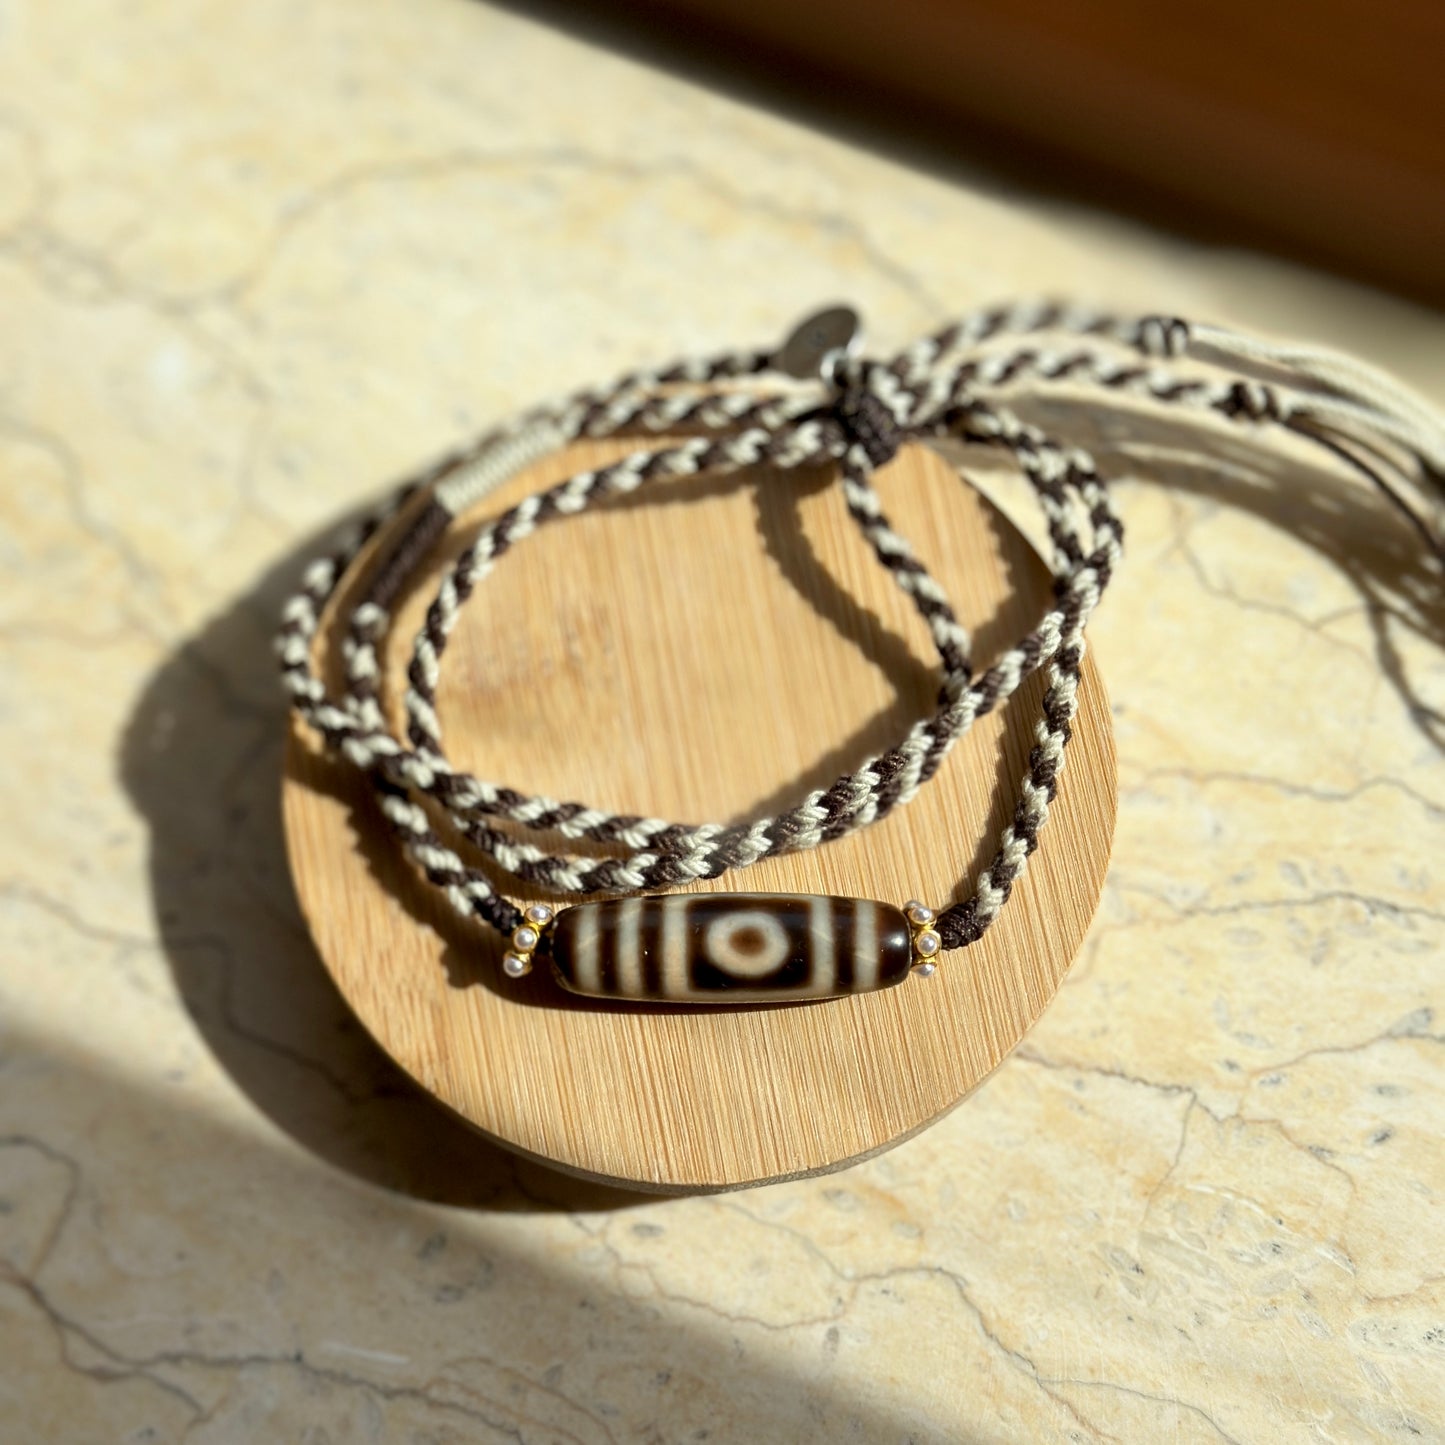 Two-Eyed Dzi Bead Necklace with Handmade Cord